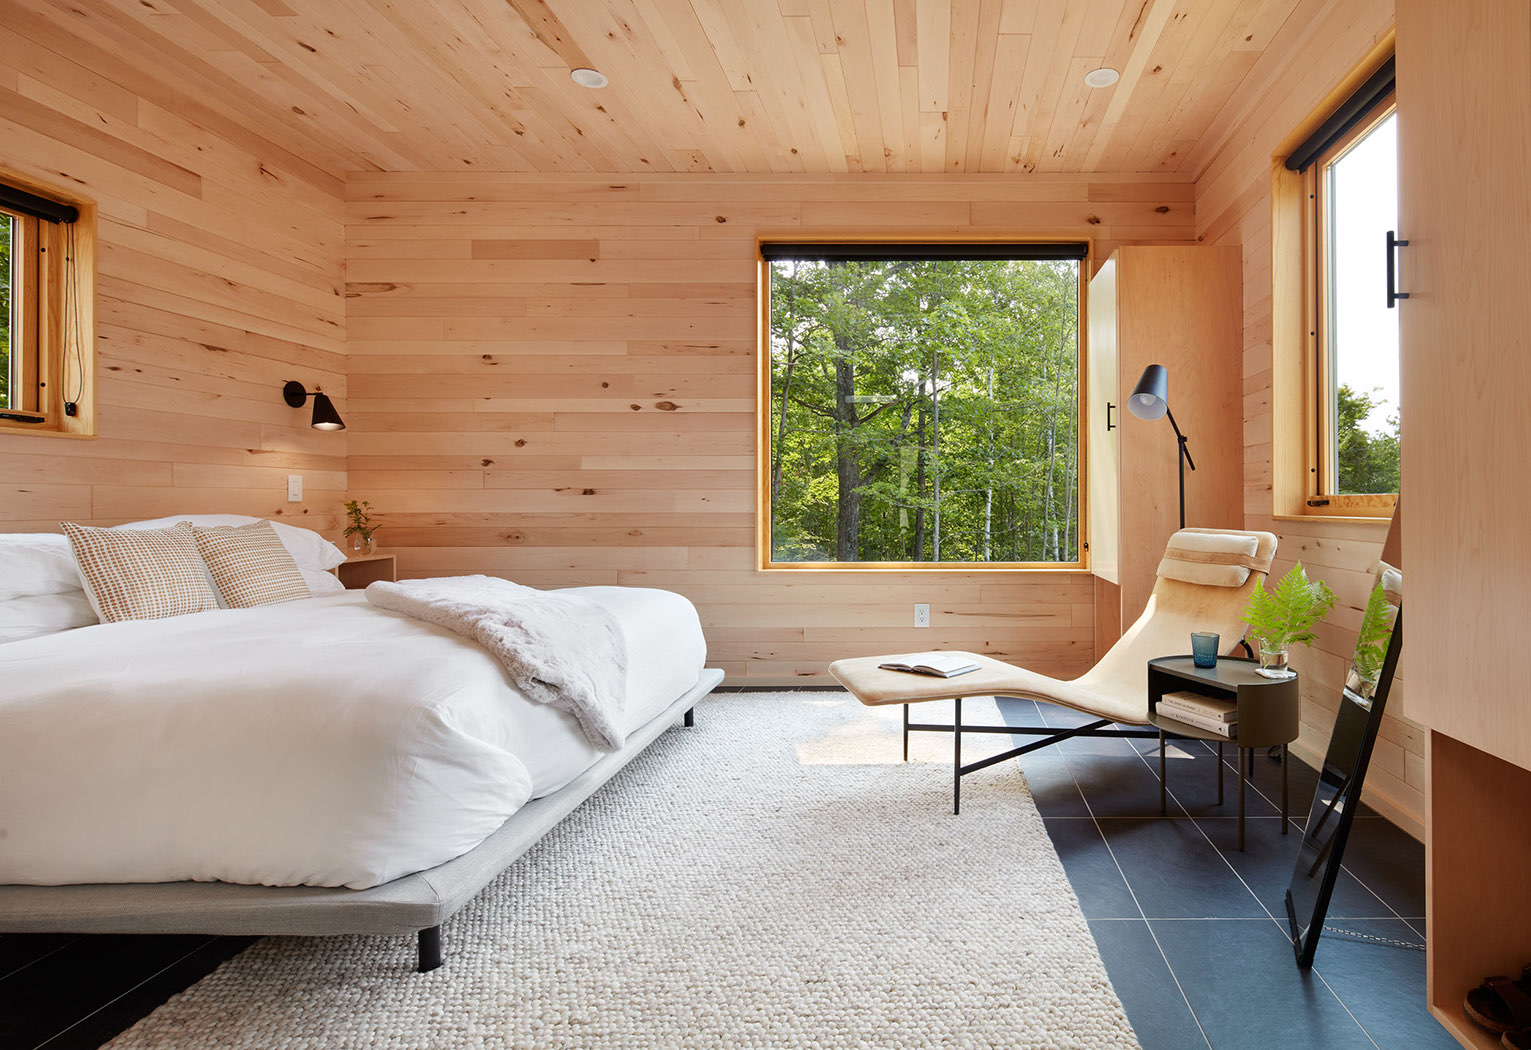 corner view of a treehouse bedroom with features as a queen bed and nightstands by the sides